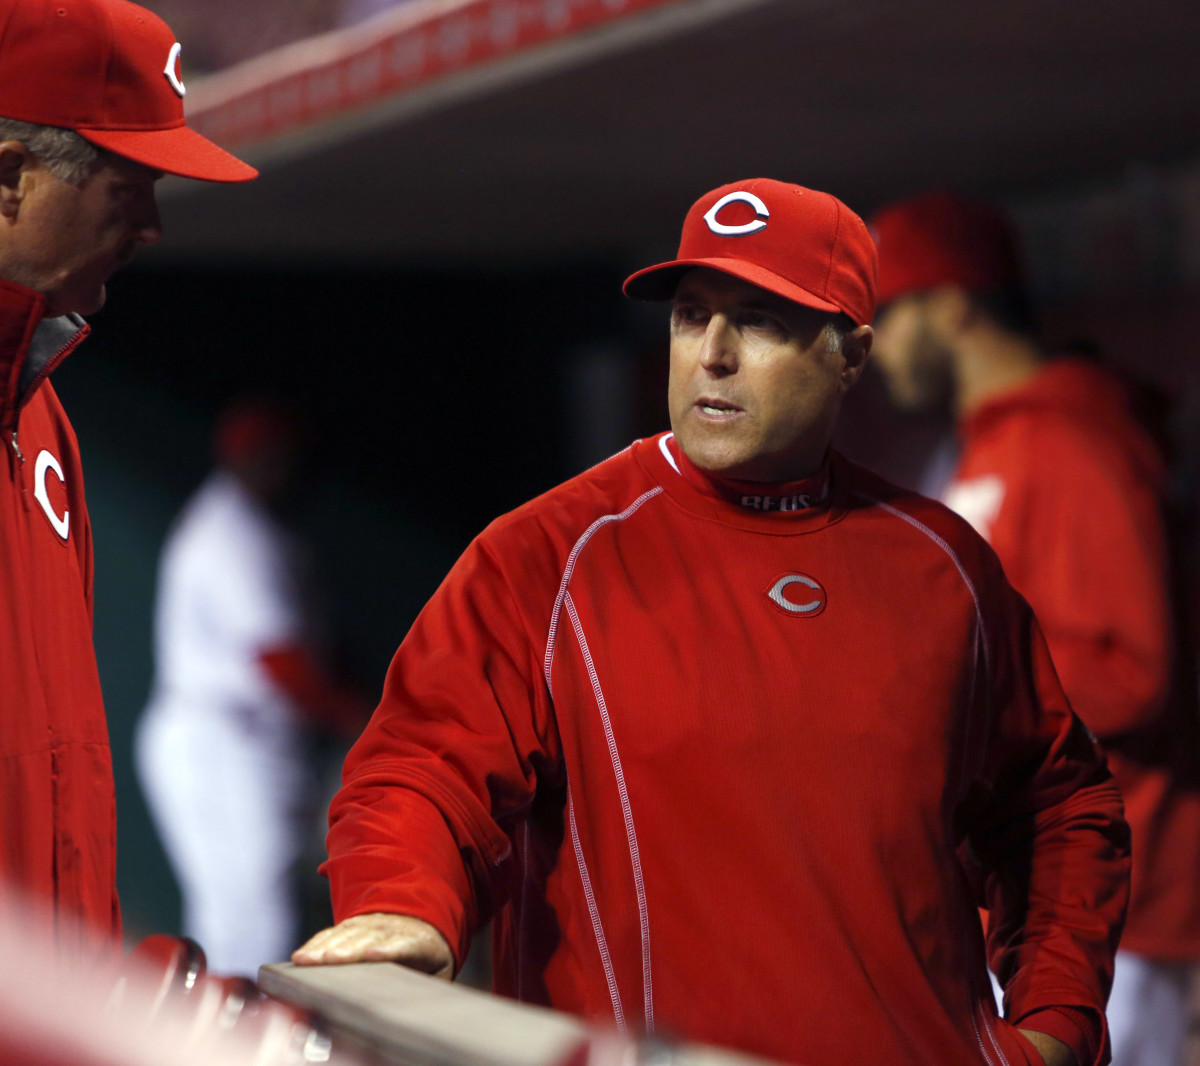 Cincinnati Reds manager Bryan Price in the dugout during the sixth inning against the SF Giants at Great American Ball Park. (2016)